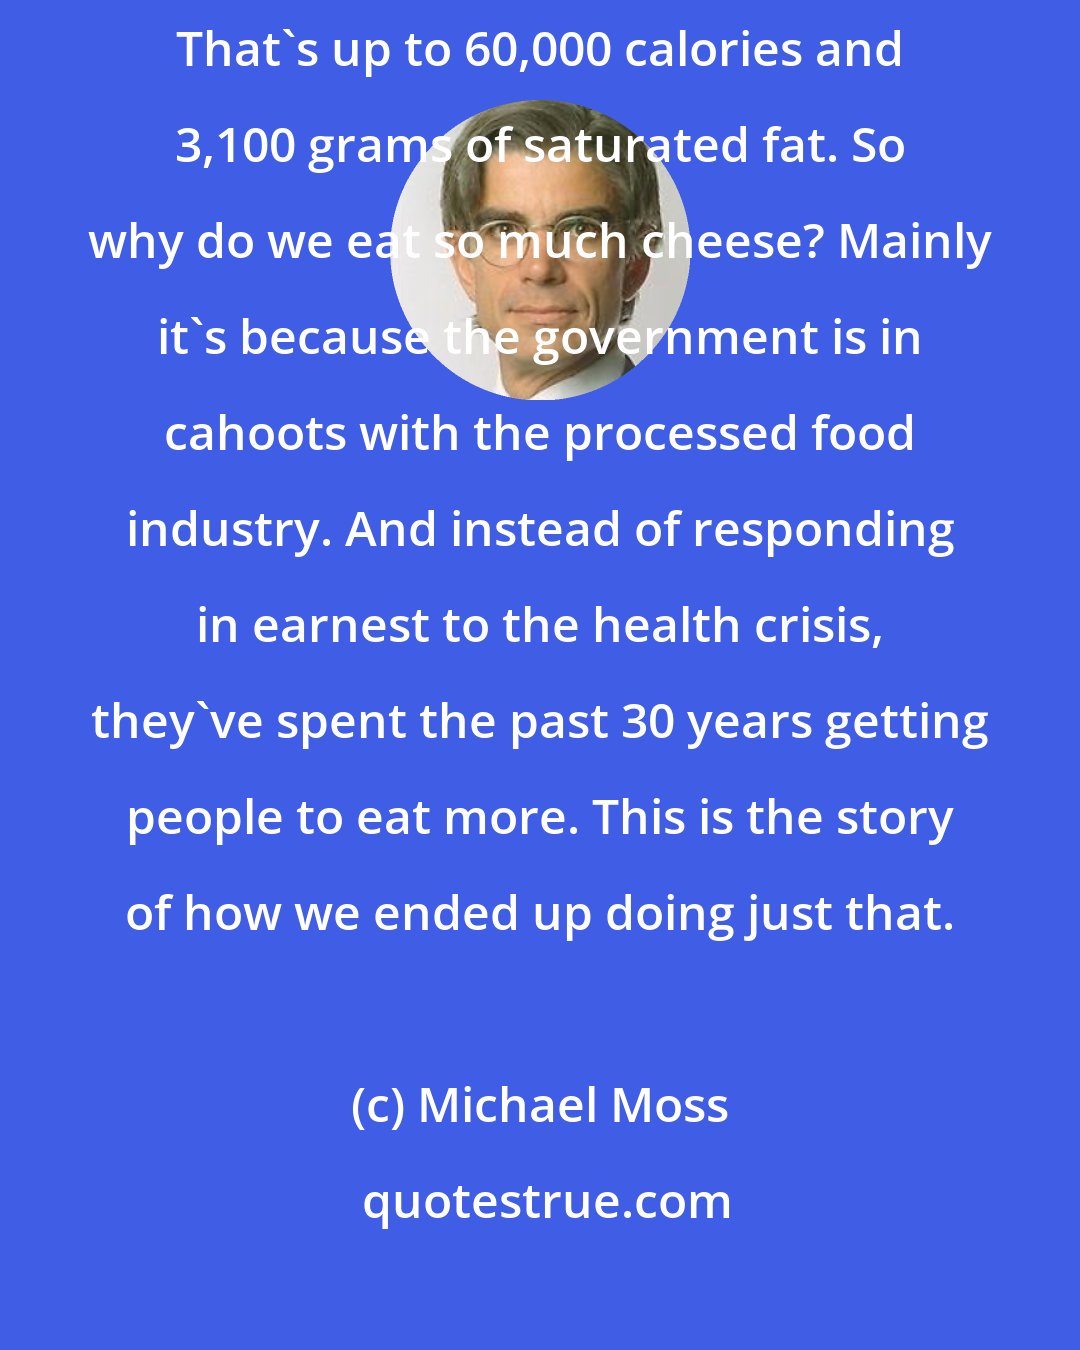 Michael Moss: Every year, the average American eats as much as 33 pounds of cheese. That's up to 60,000 calories and 3,100 grams of saturated fat. So why do we eat so much cheese? Mainly it's because the government is in cahoots with the processed food industry. And instead of responding in earnest to the health crisis, they've spent the past 30 years getting people to eat more. This is the story of how we ended up doing just that.